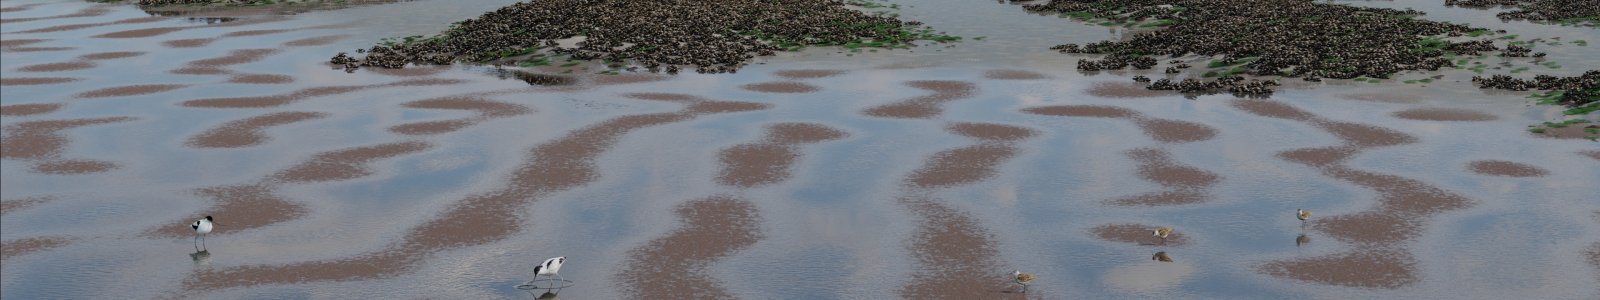 Spatial pattern formation of mussels and diatoms on a tidal flat.